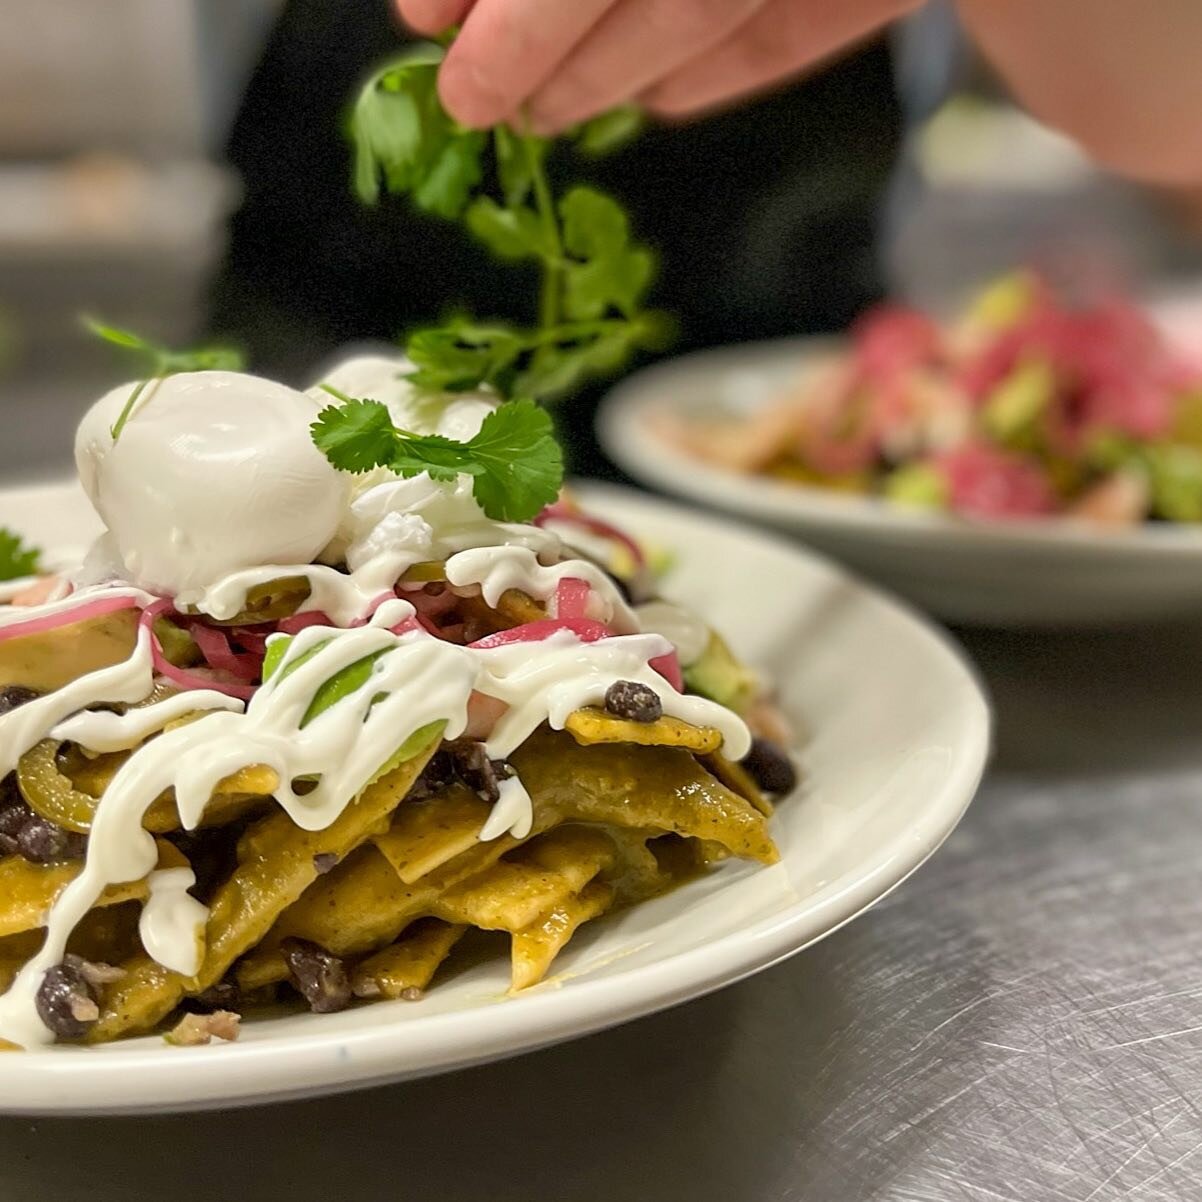 Chilaquiles is back for brunch today!! 
.
Brunch every Sunday 11-4. 
.
#chilaquiles #sundaybrunch #niagarabrunch